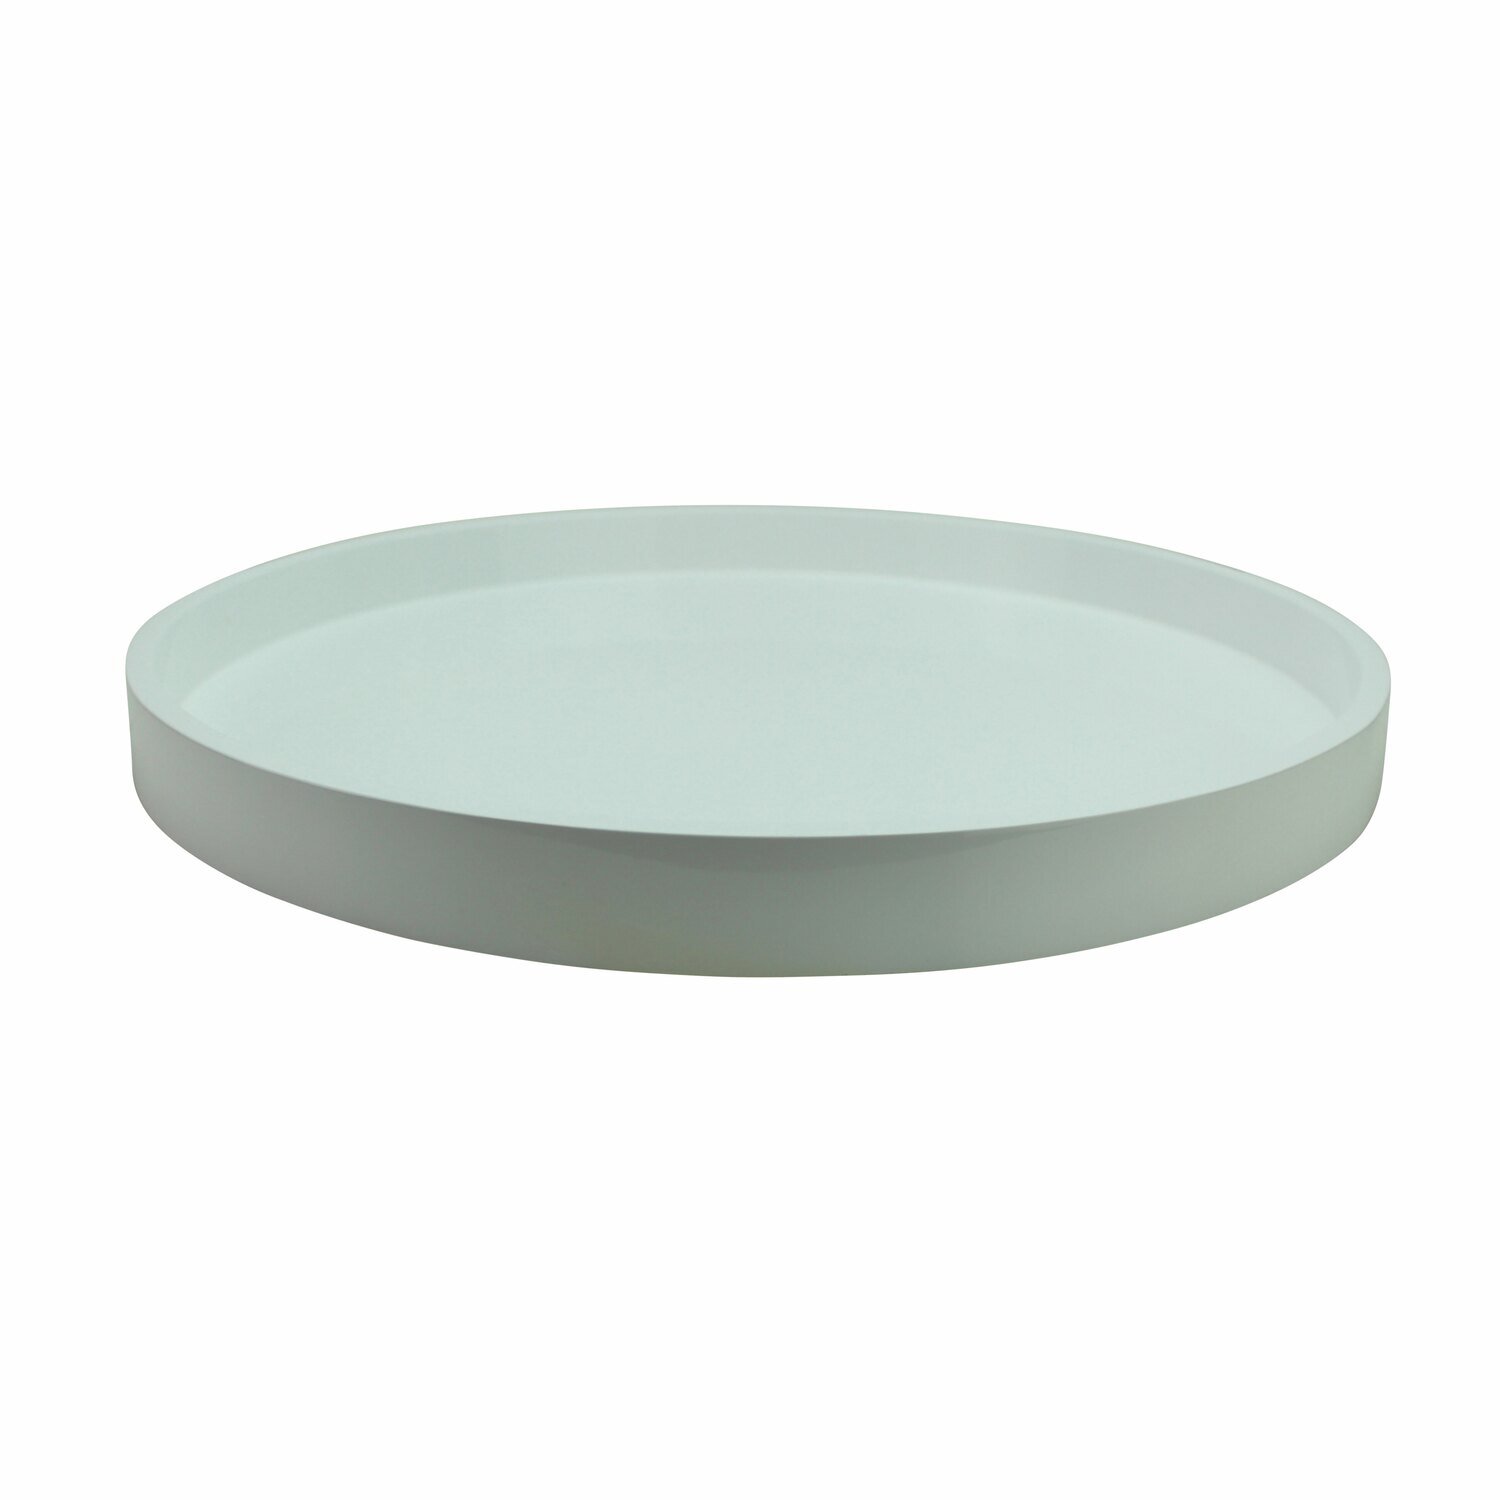 Addison Ross 16 x 16 Inch Round Tray White Lacquer TR8000